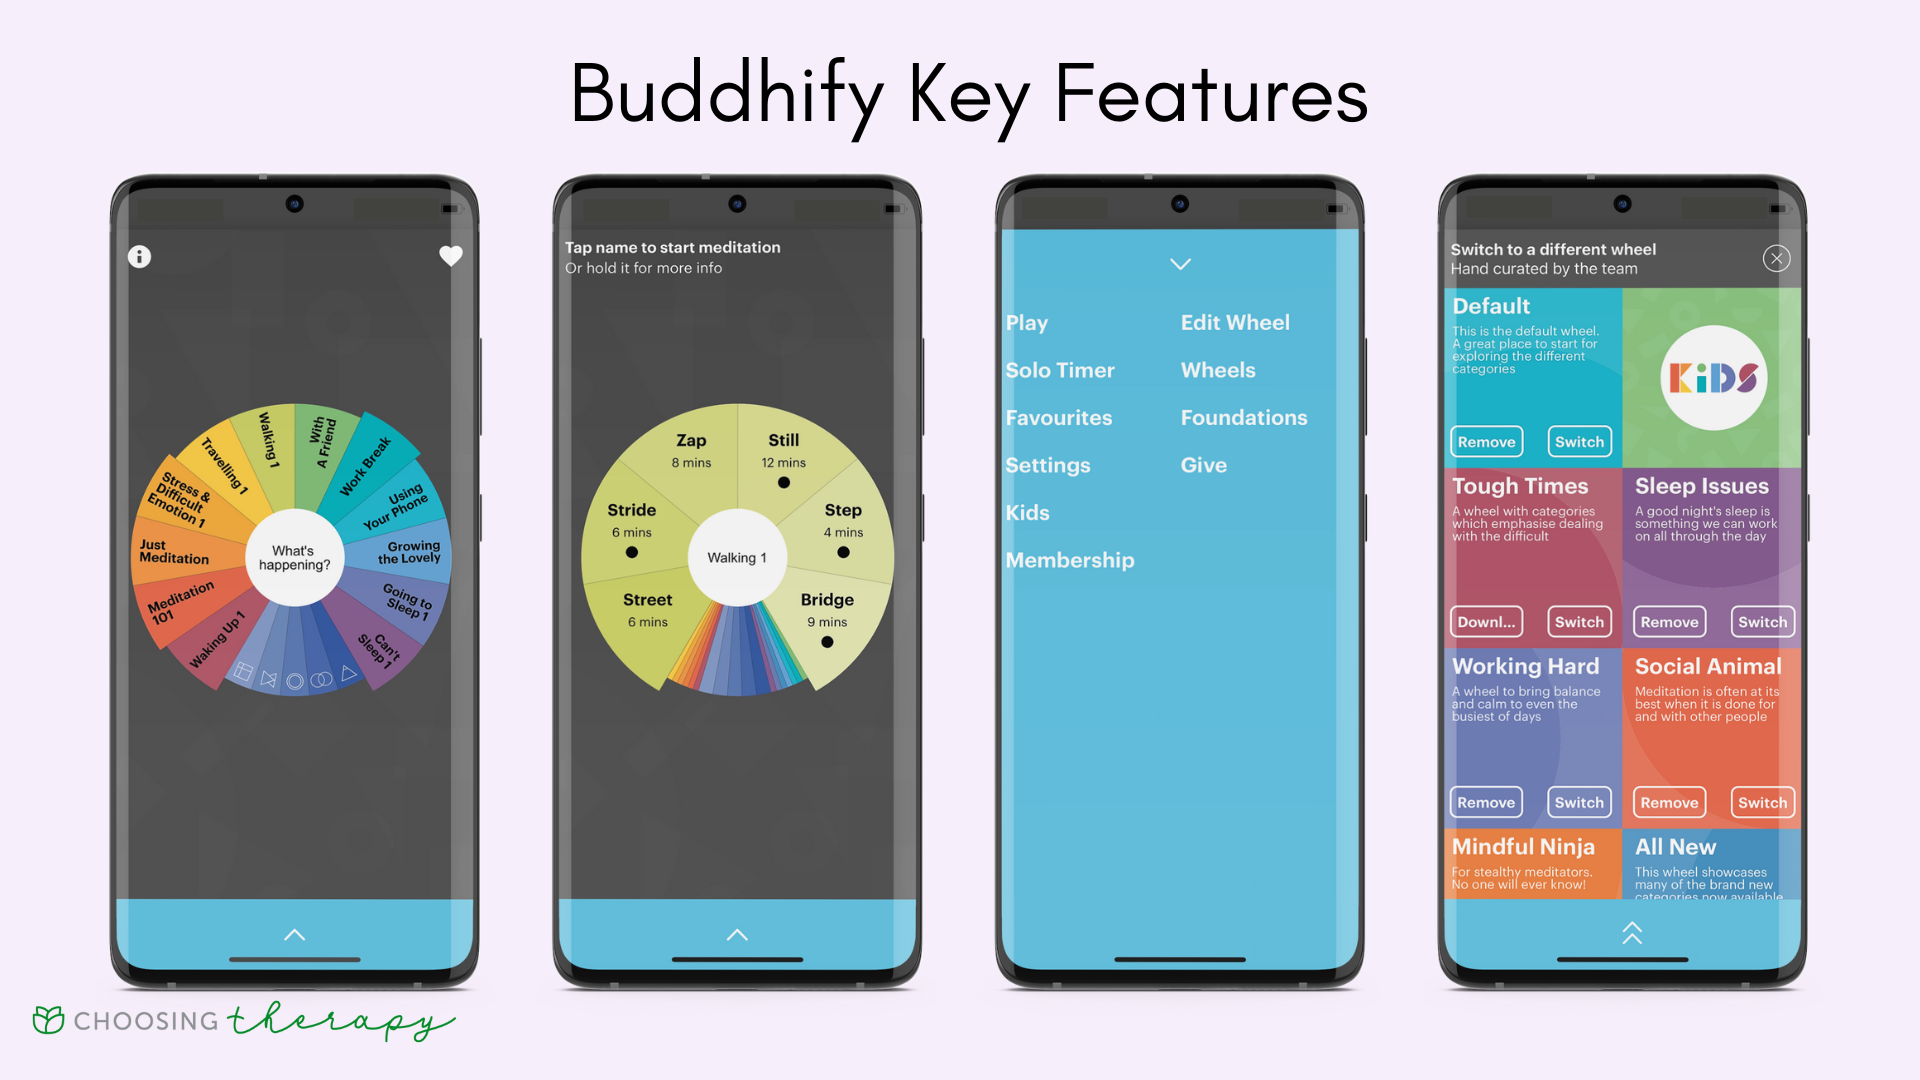 Buddhify App Review 2022 - Image of the key features in the Buddhify app, the meditation wheel, a meditation wedge, the menu, and different wheels to switch to